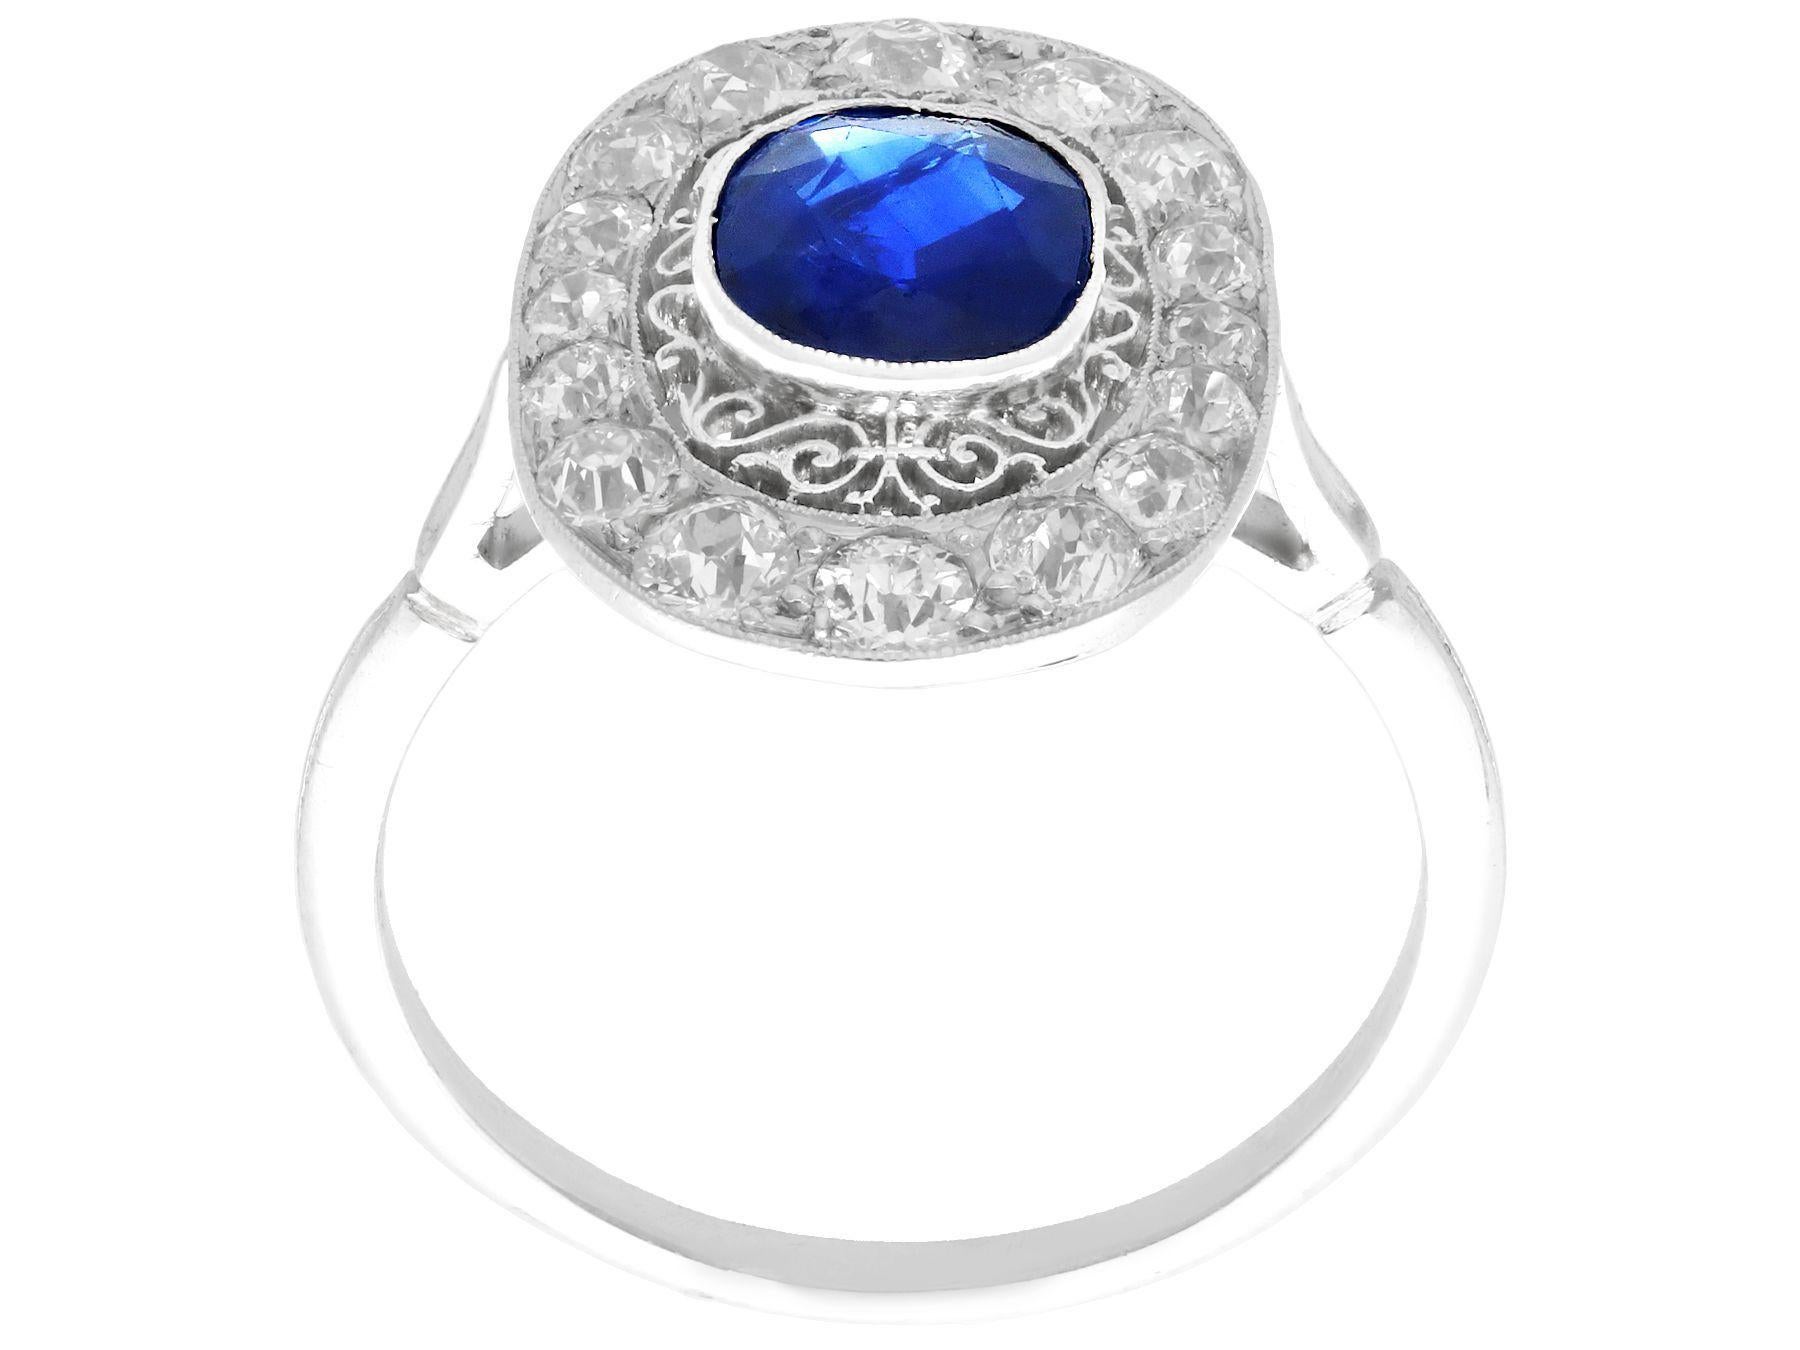 Women's 1940s 1.43 Carat Sapphire and Diamond Platinum Cocktail Ring For Sale